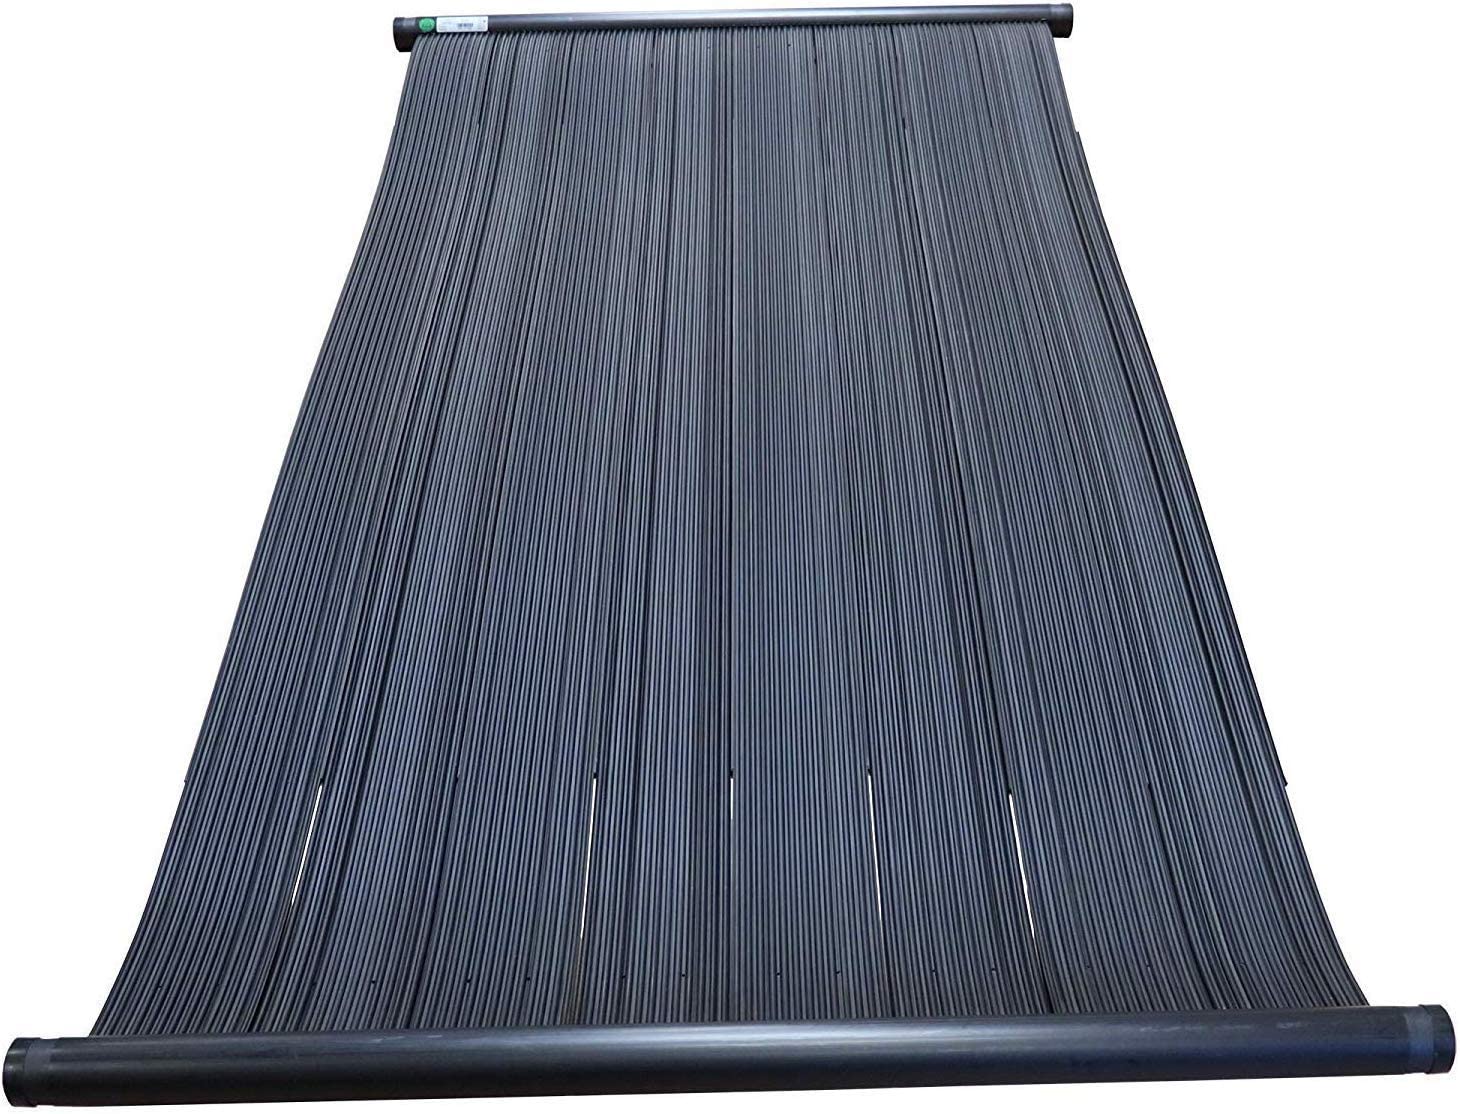 Solar Pool Supply Universal Solar Pool Heater Panel Replacement